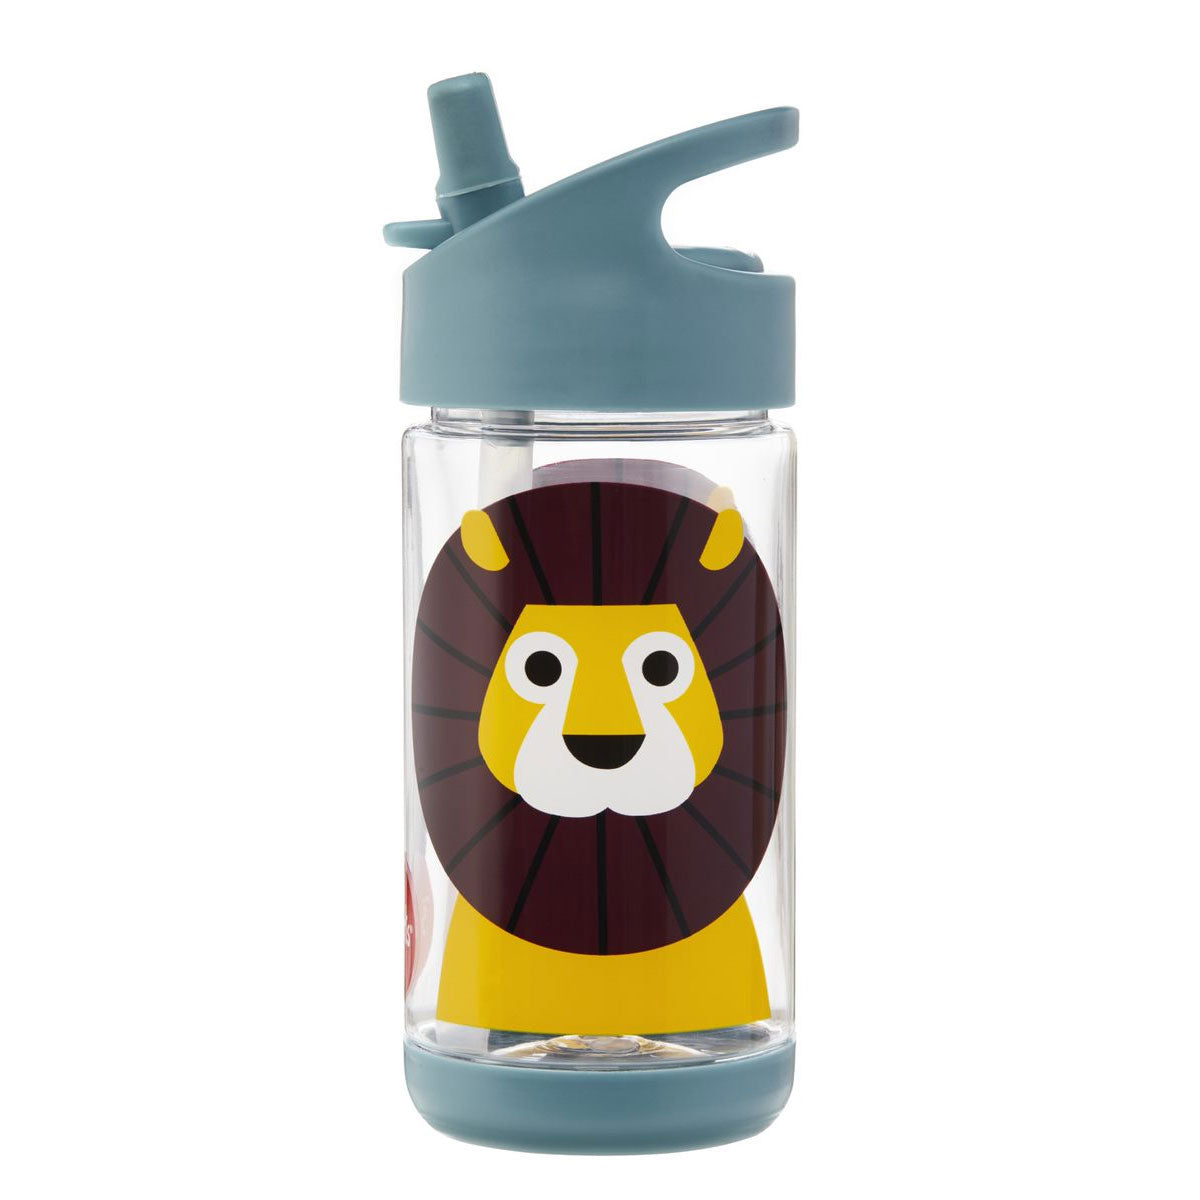 The 3 Sprouts Water Bottle is a must have for your child's lunch bag. Made from Tritan, a high-quality plastic, each water bottle holds up to 12 fluid ounces.